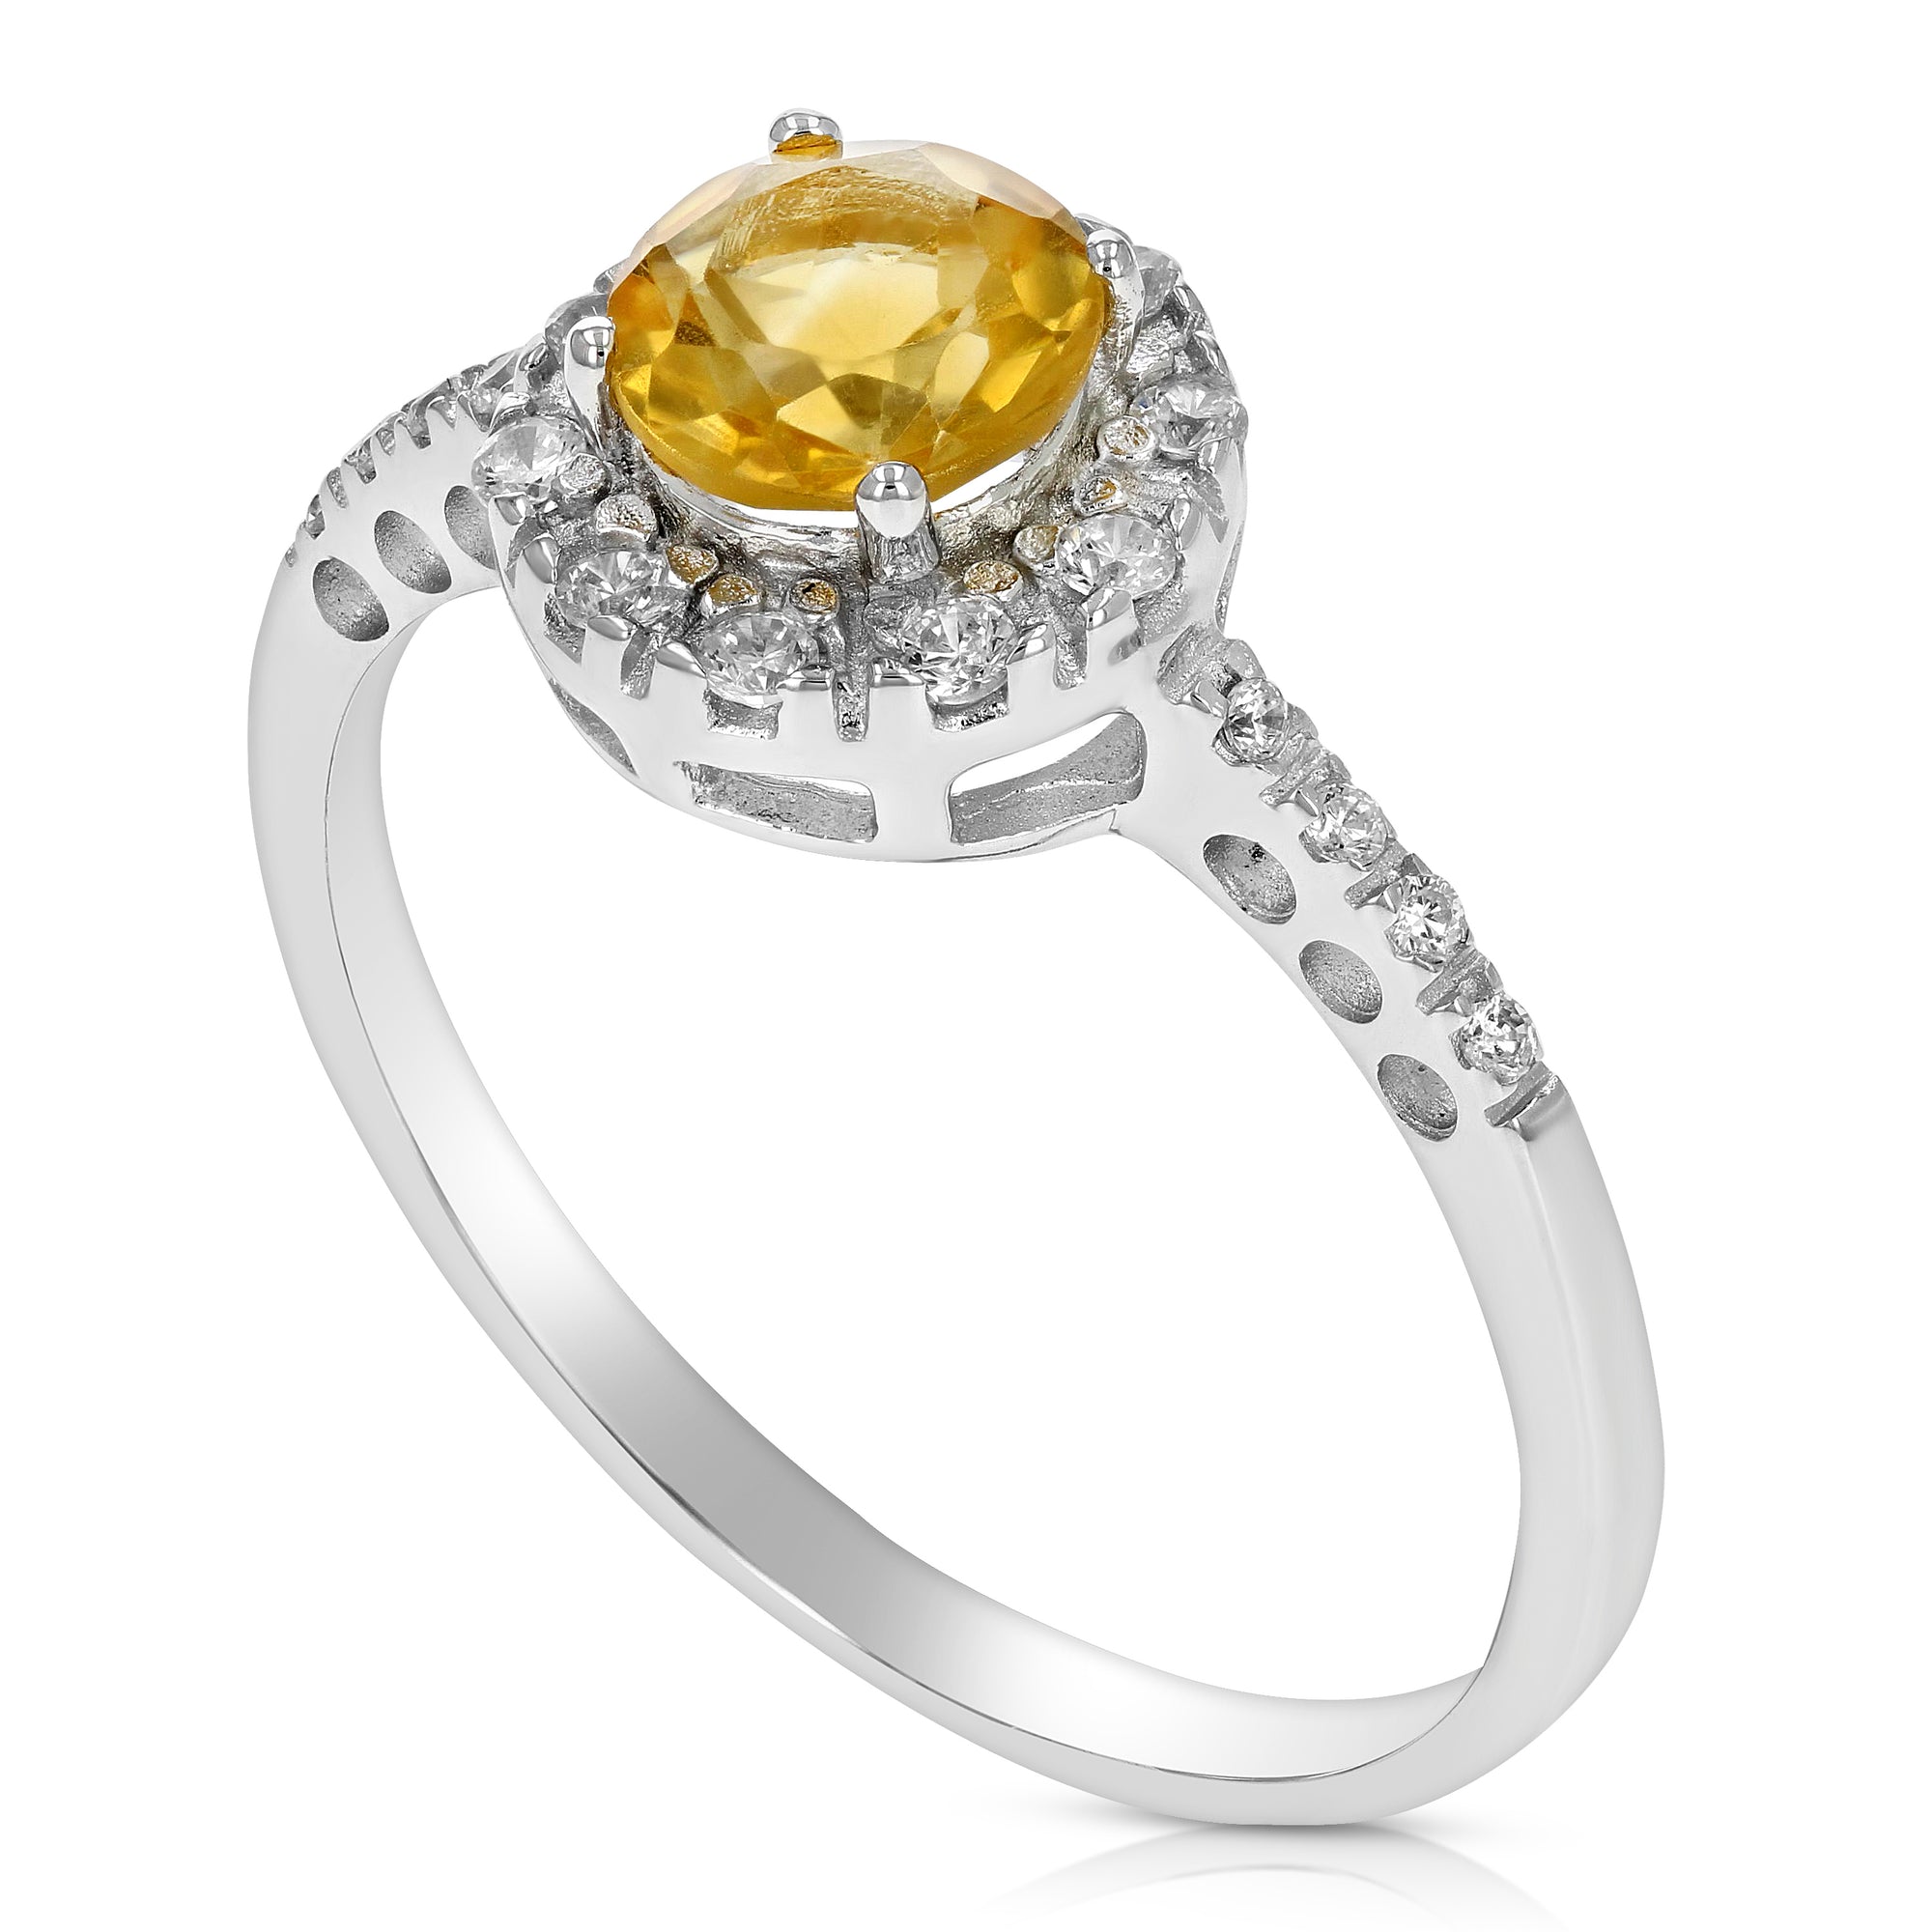 0.60 cttw Citrine Ring .925 Sterling Silver with Rhodium Plating Halo Round 6 MM